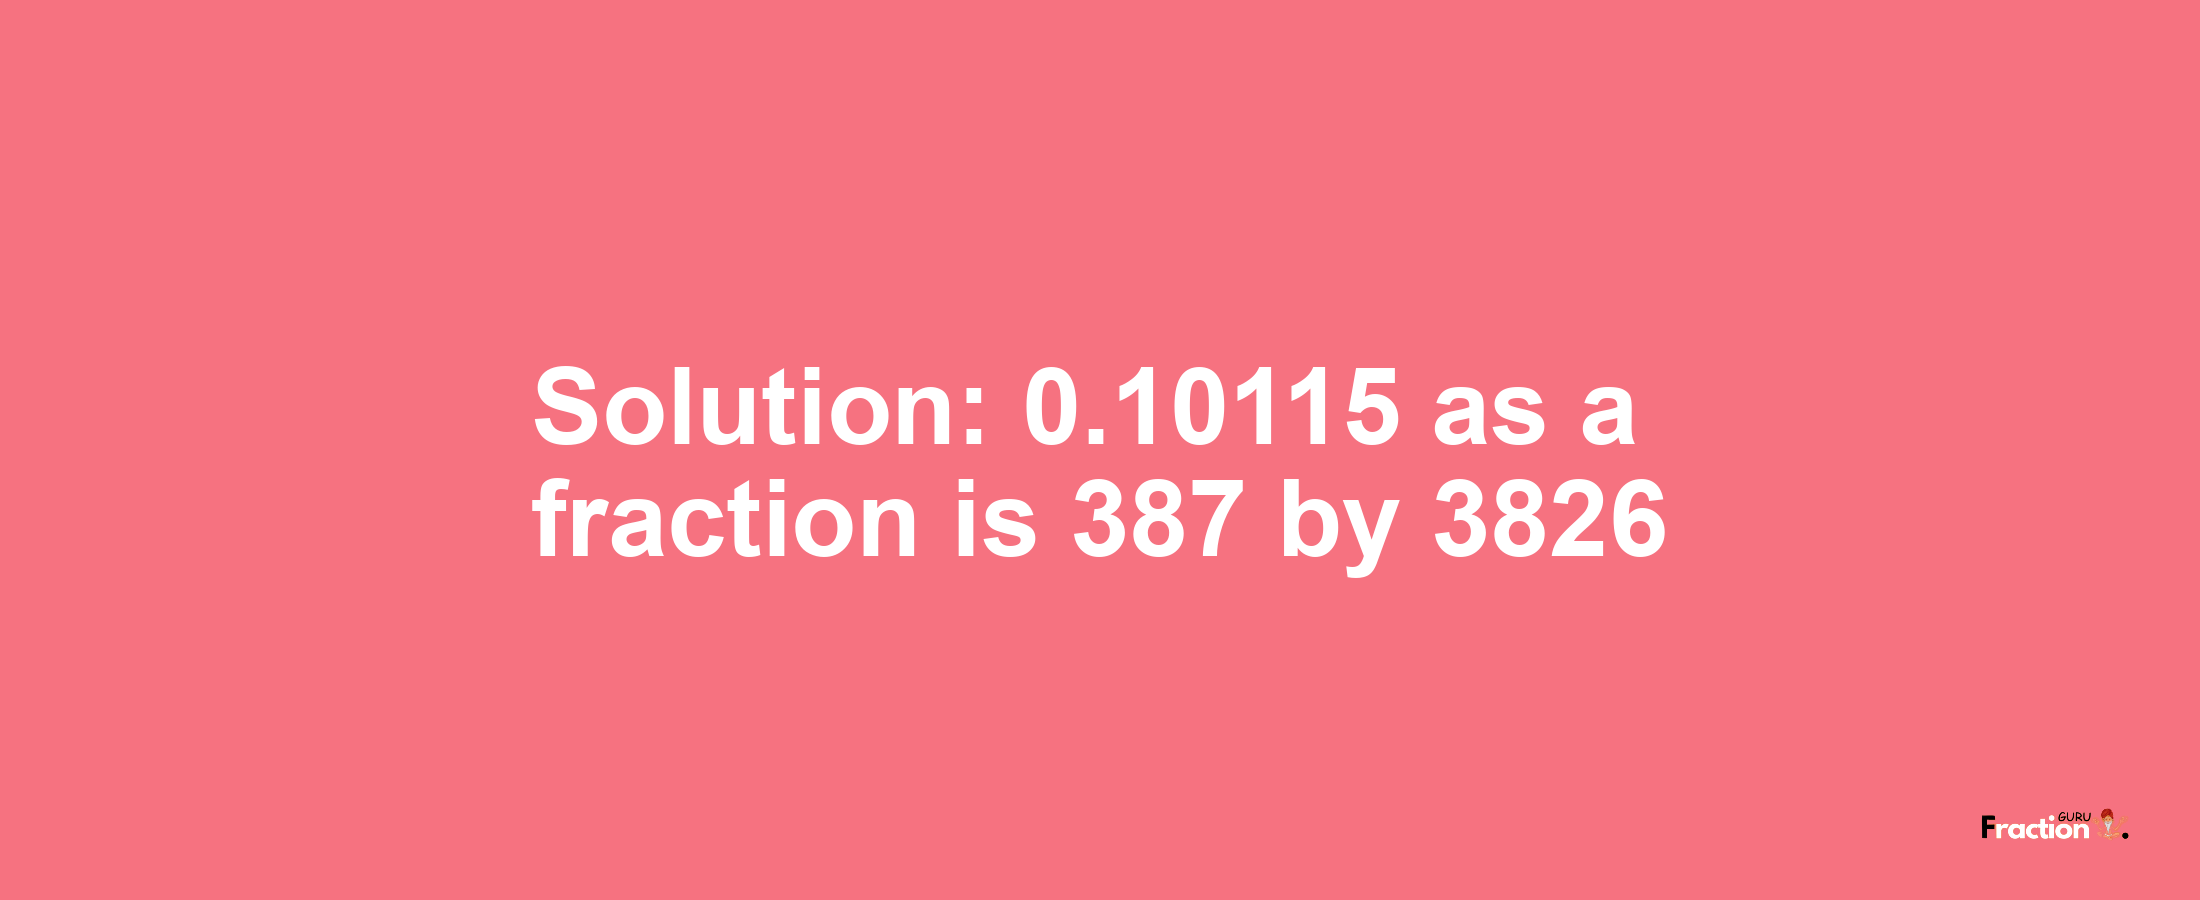 Solution:0.10115 as a fraction is 387/3826